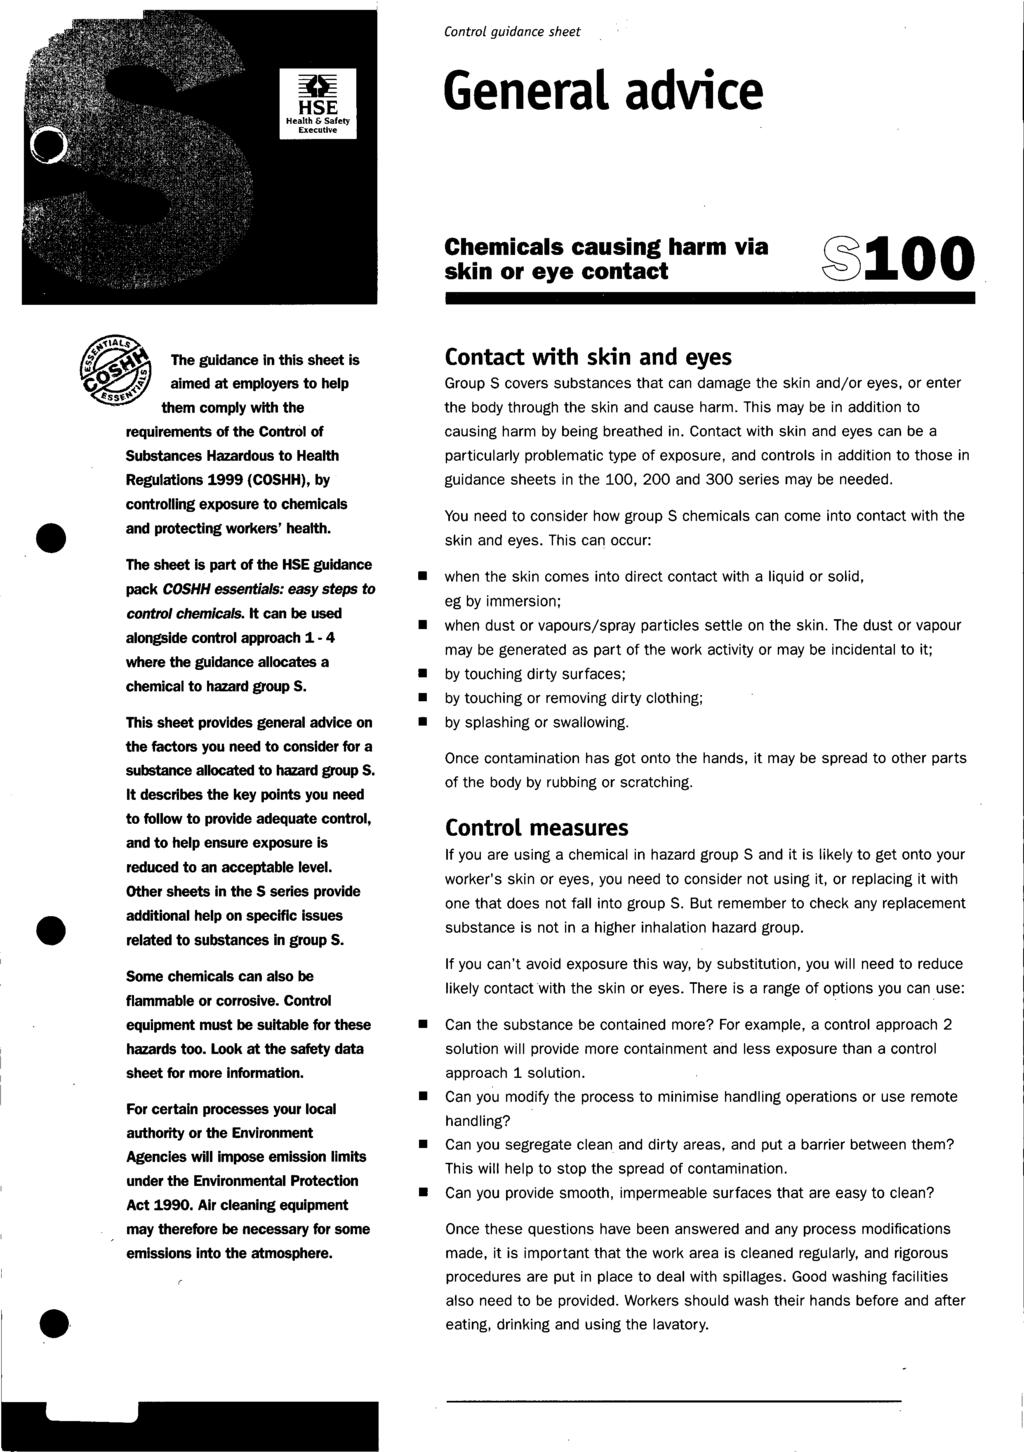 Control guidance sheet General advice Chemicals causing harm via skin or eye contact 8100 The guidance in this sheet is aimed at employers to help them comply with the requirements of the Control of